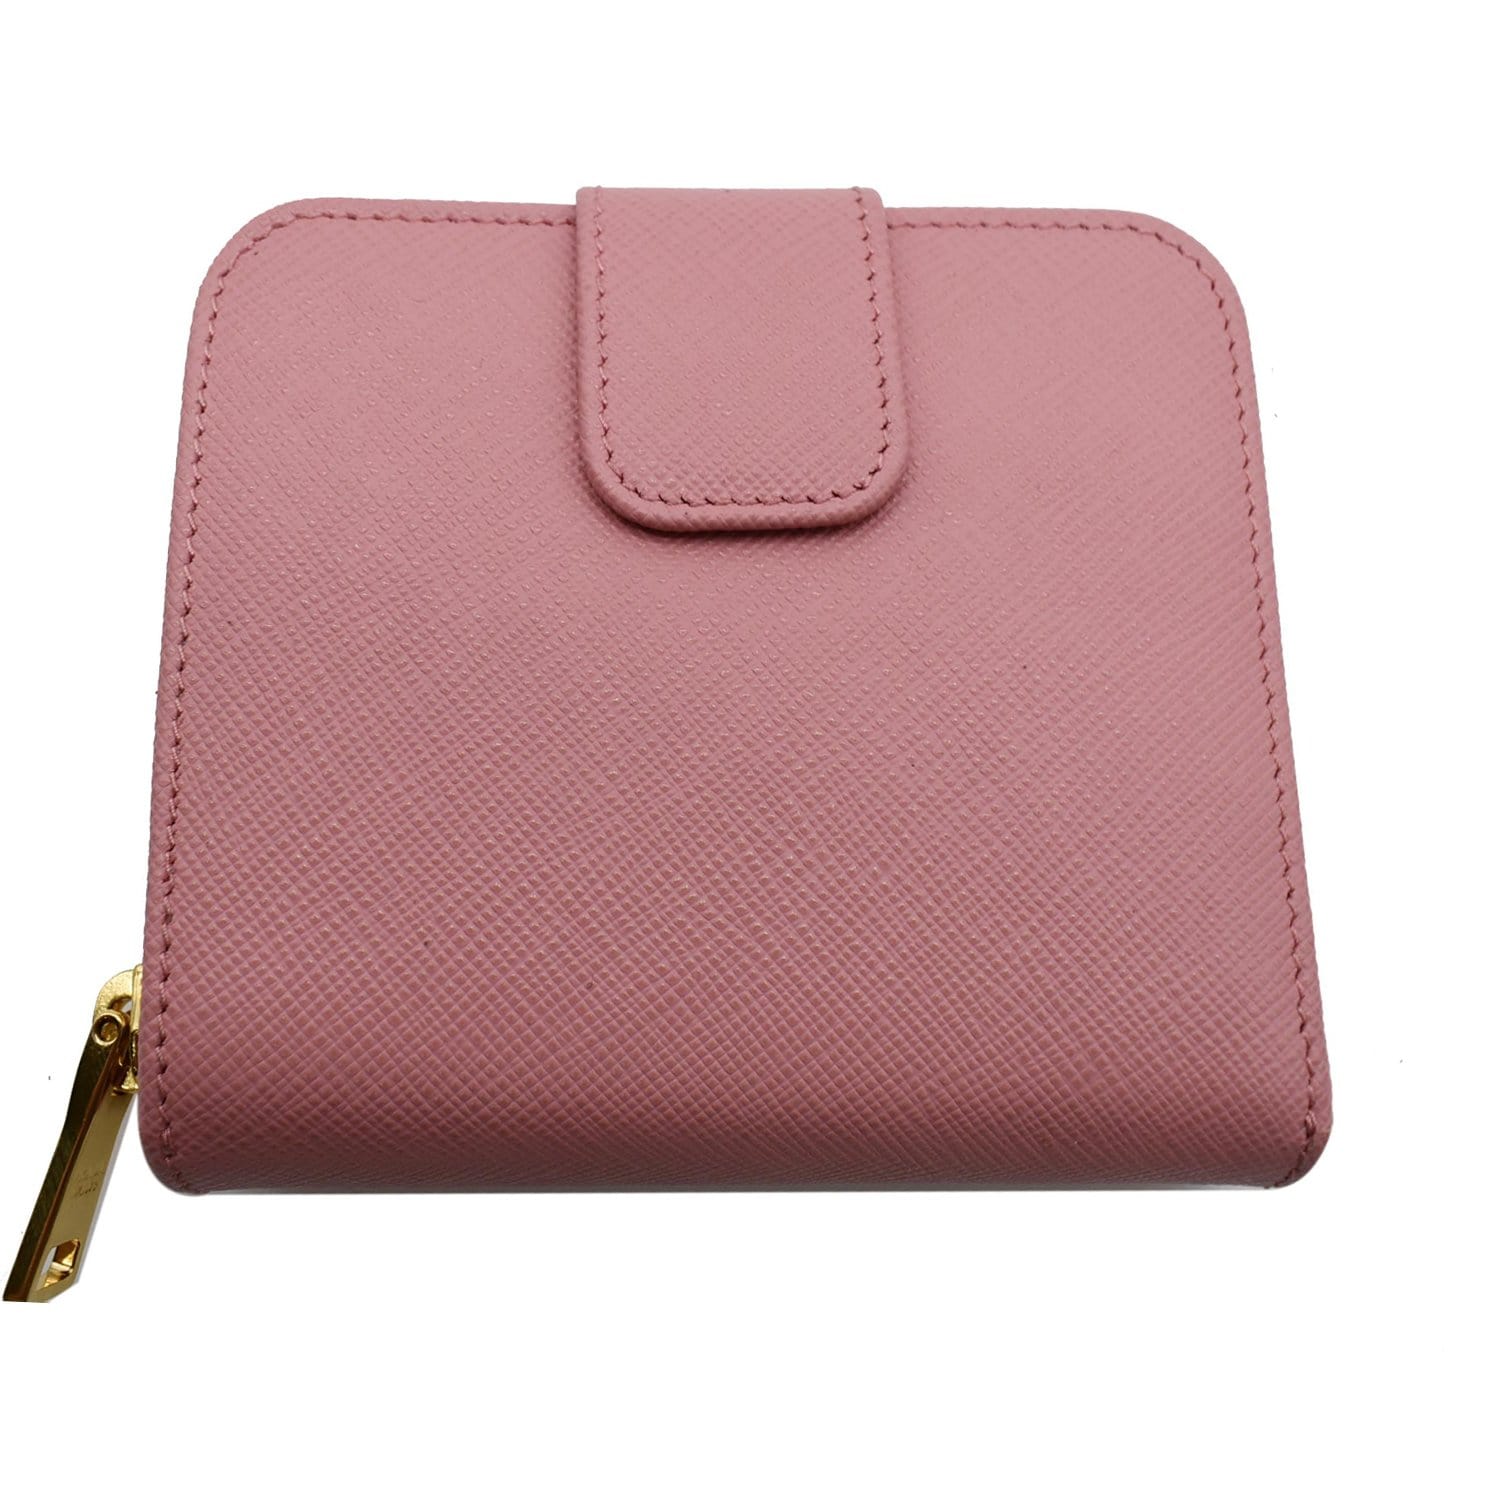 Prada Pre-owned Women's Wallet - Pink - One Size